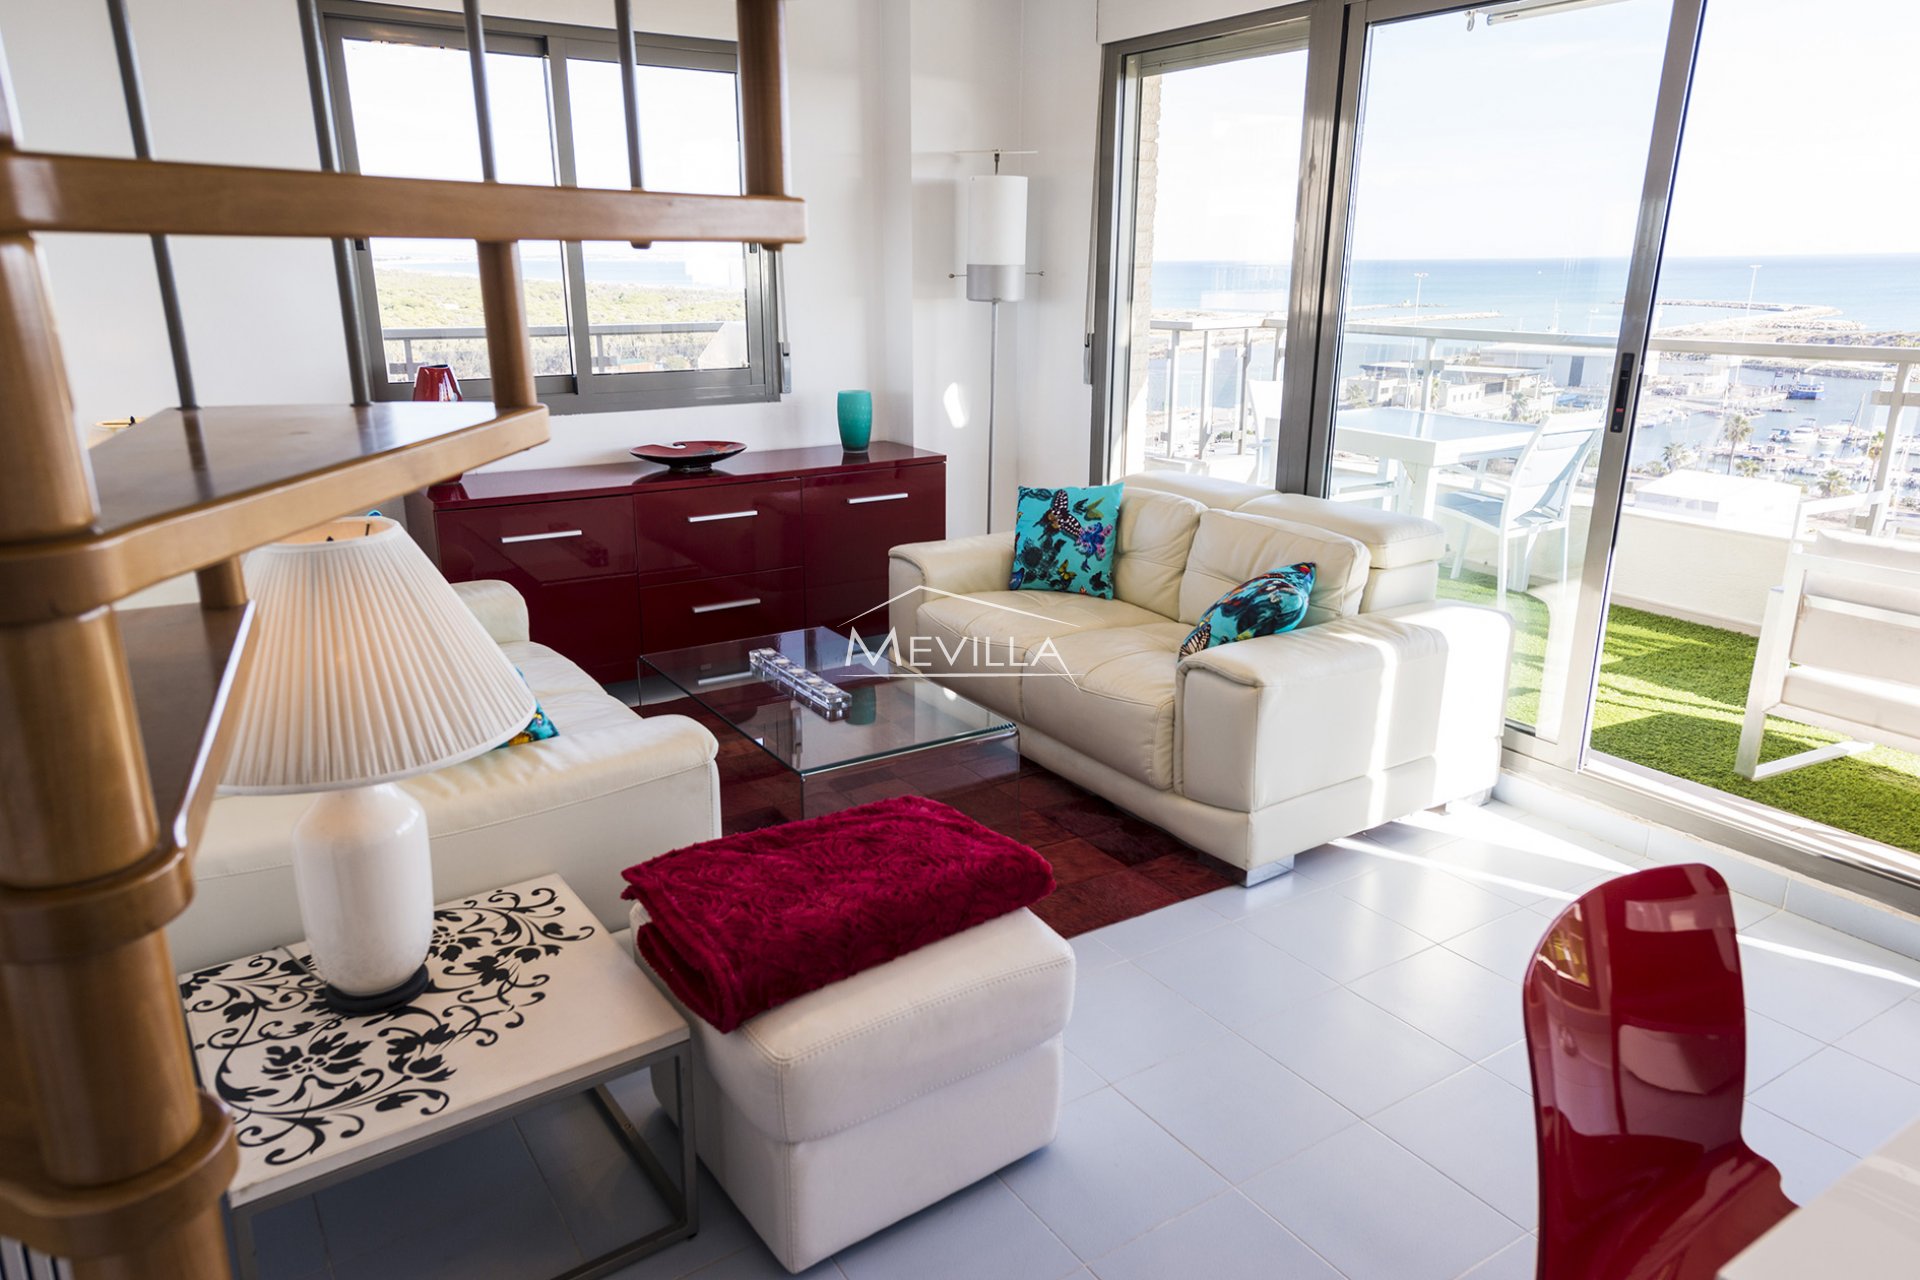 The living room with sea views